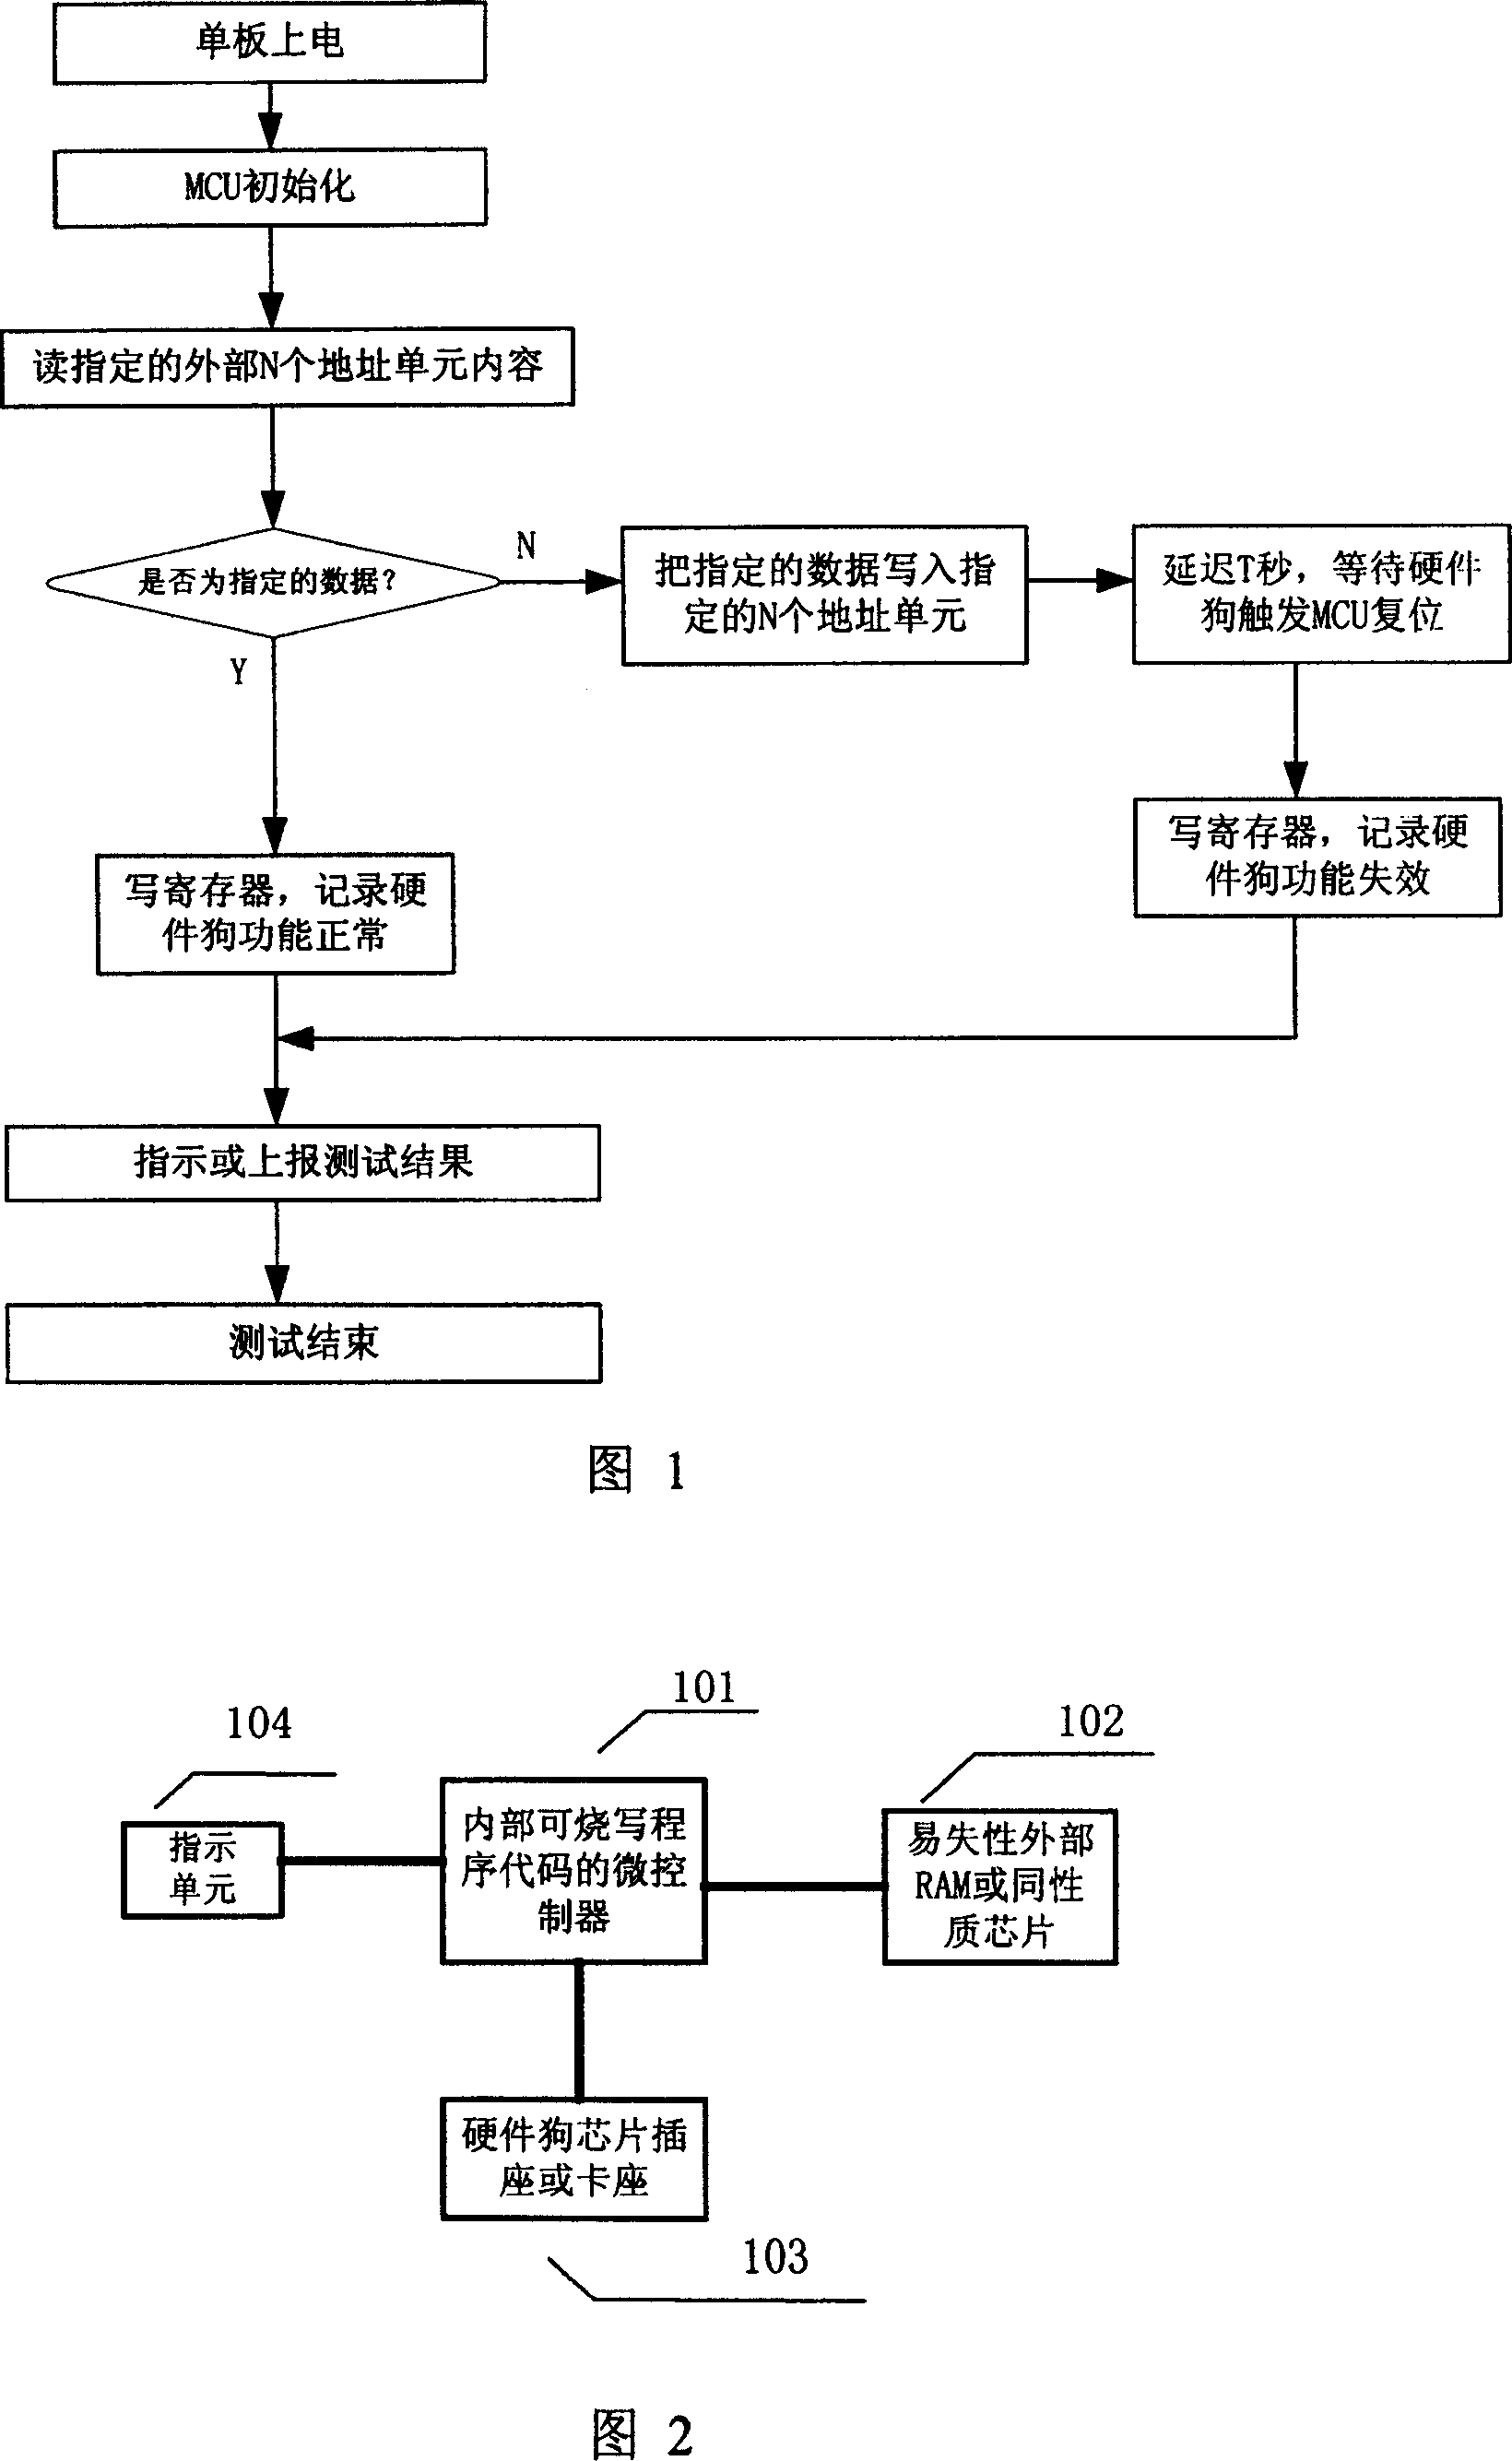 Function testing method and system for hardware watchdog